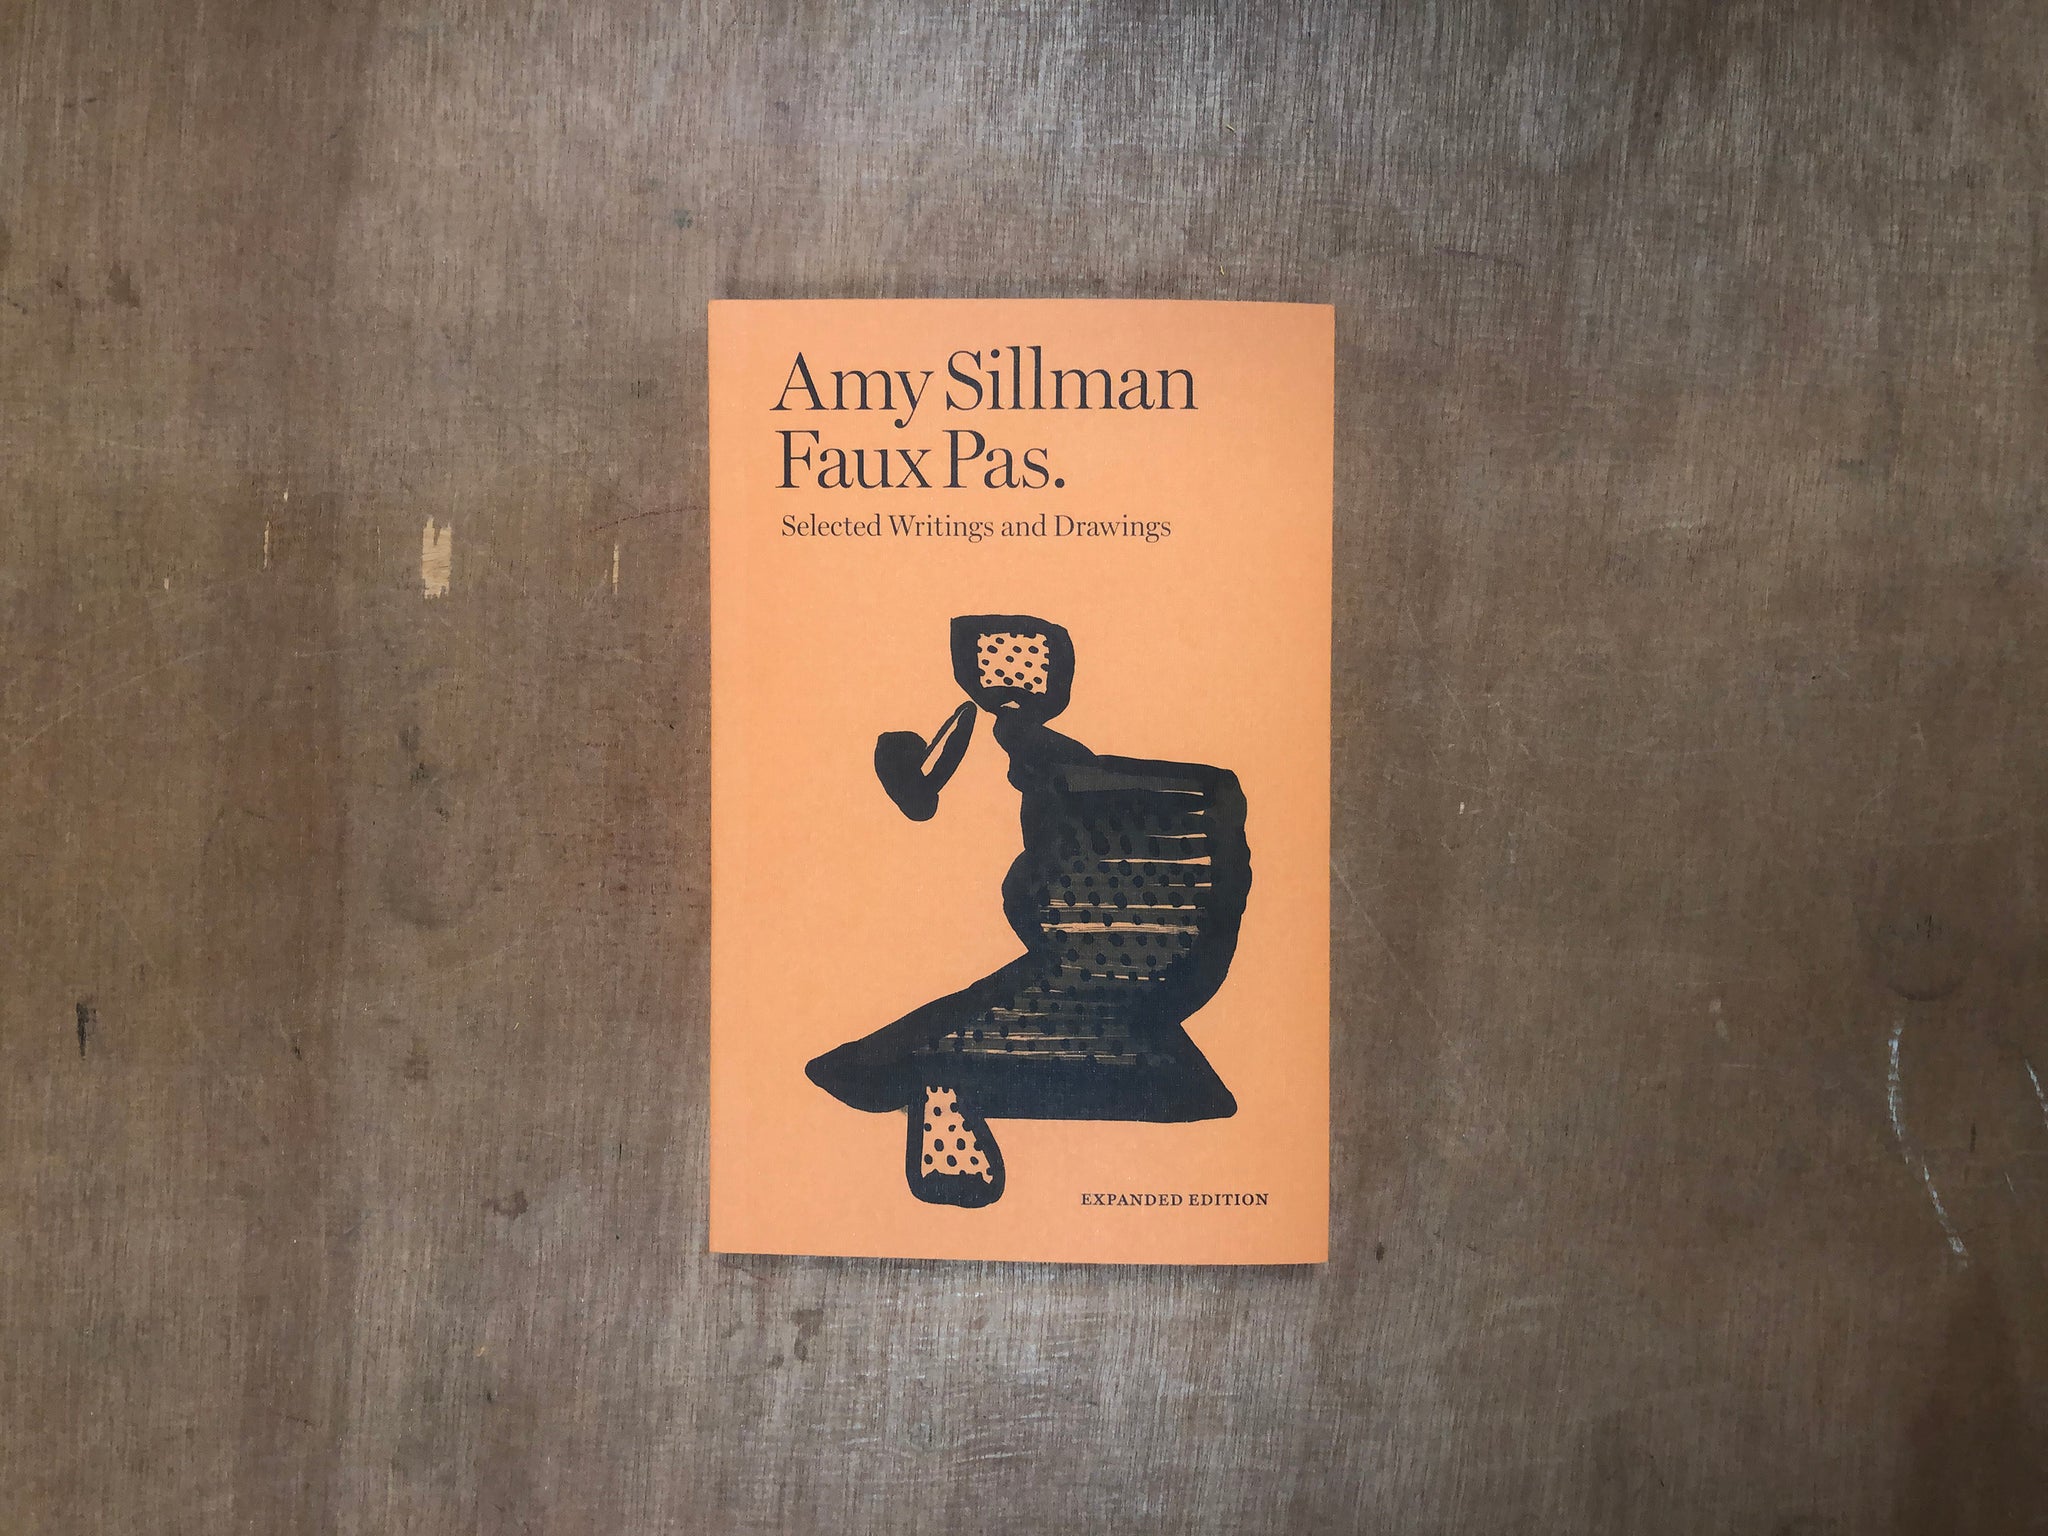 FAUX PAS. SELECTED WRITINGS AND DRAWINGS (EXPANDED EDITION) by Amy Sillman